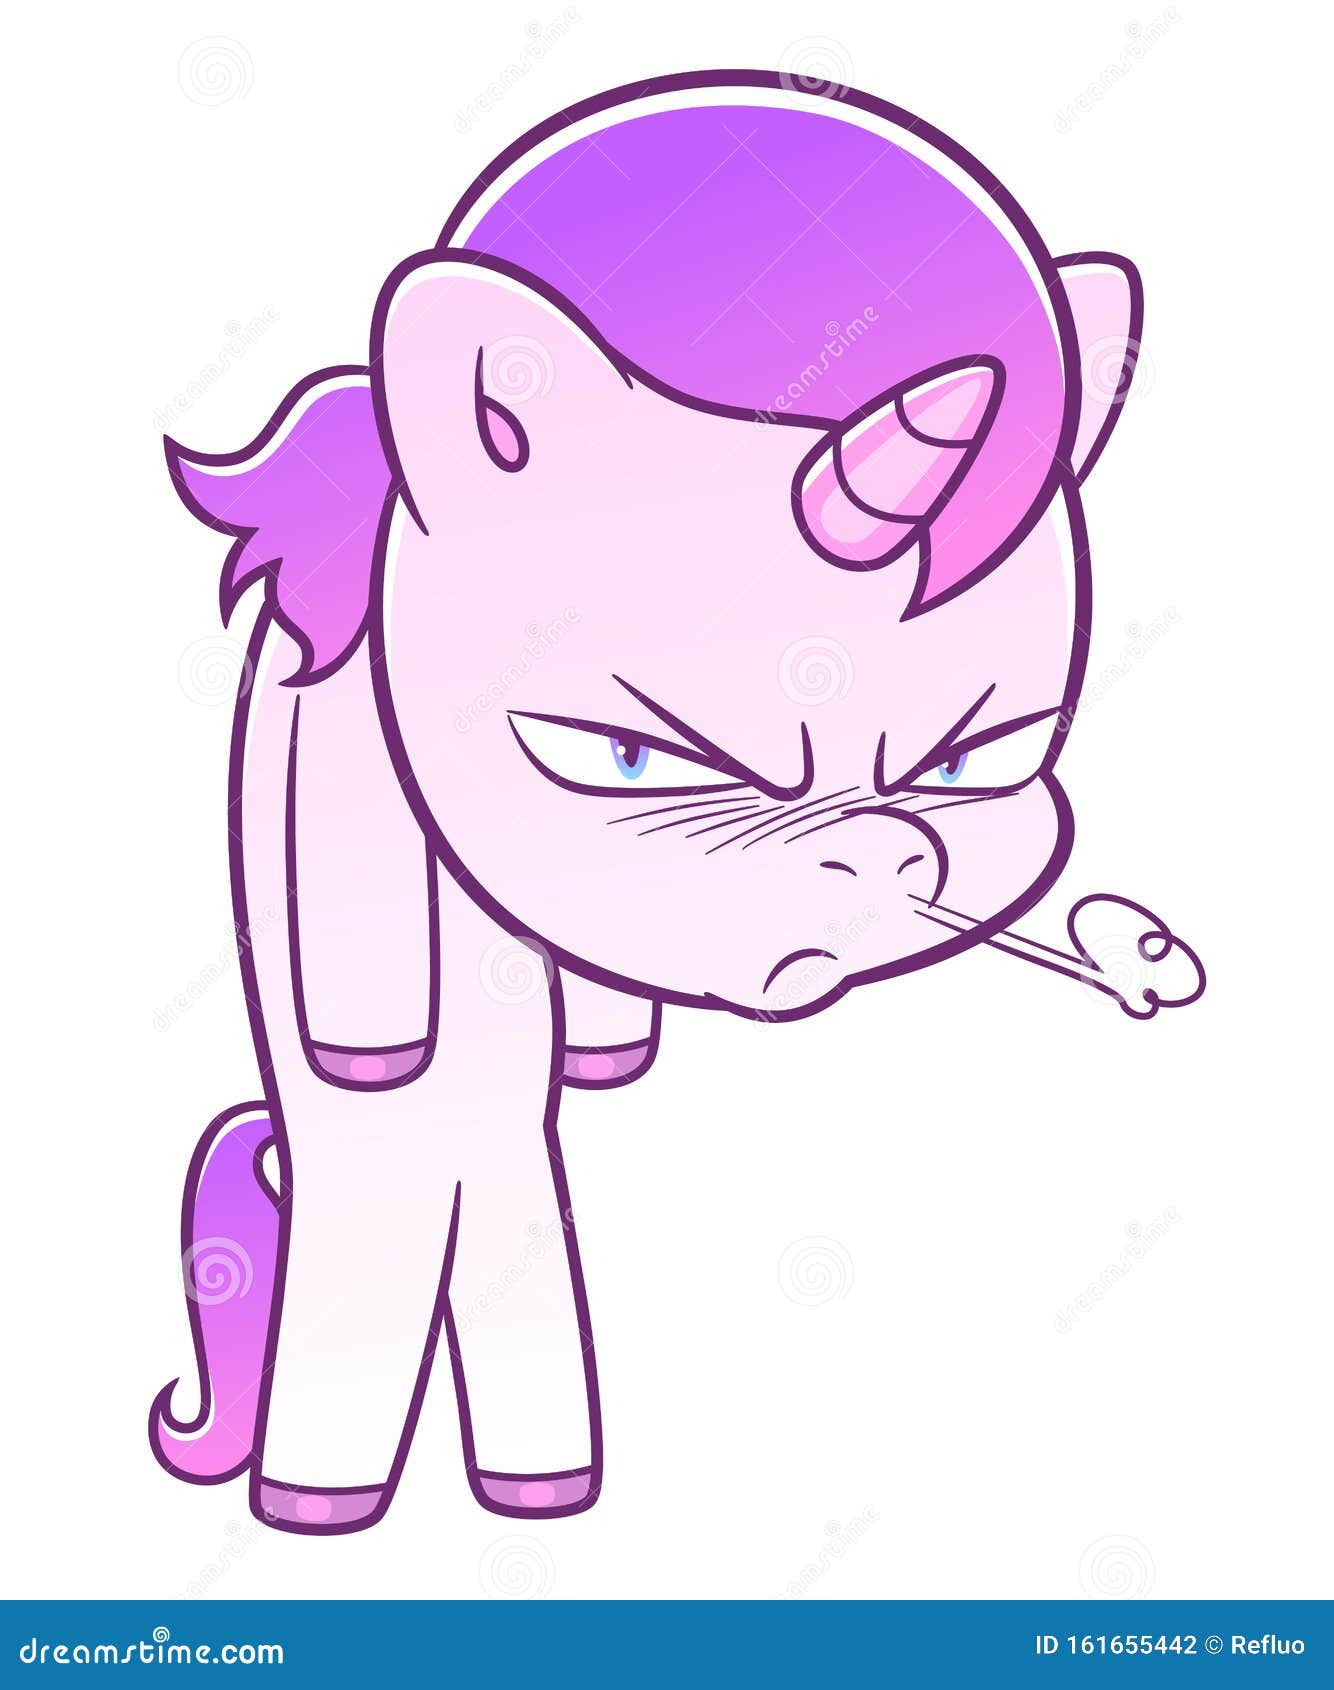 Download Free Zombie Angry Unicorn Svg : Angry unicorn svg | Etsy ...